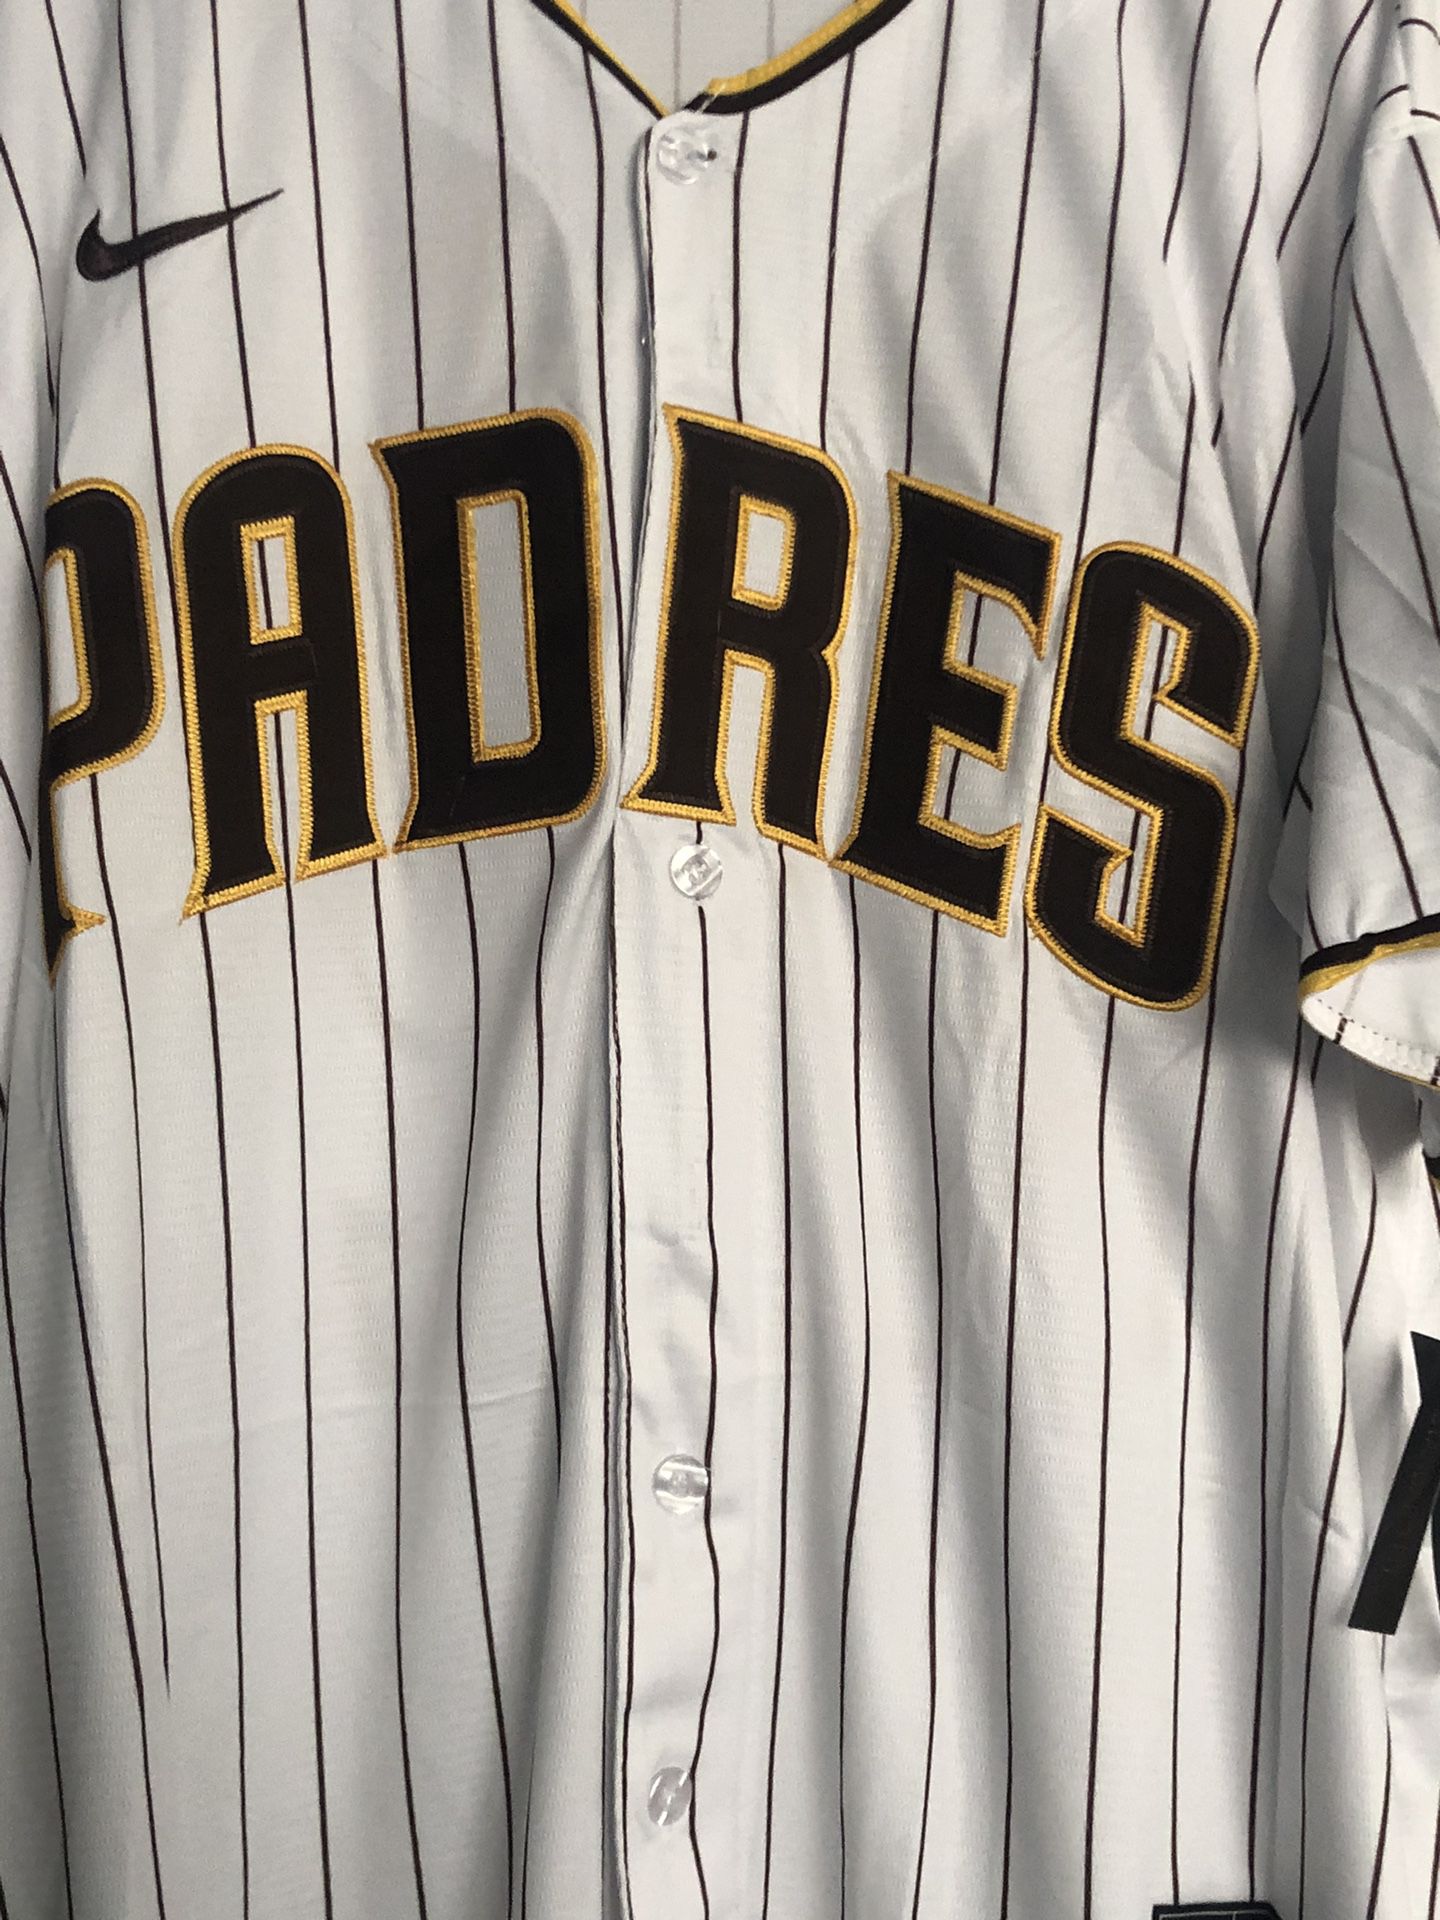 San Diego Padres Military Camo Jersey Tatis Jr Jersey for Sale in Chula  Vista, CA - OfferUp